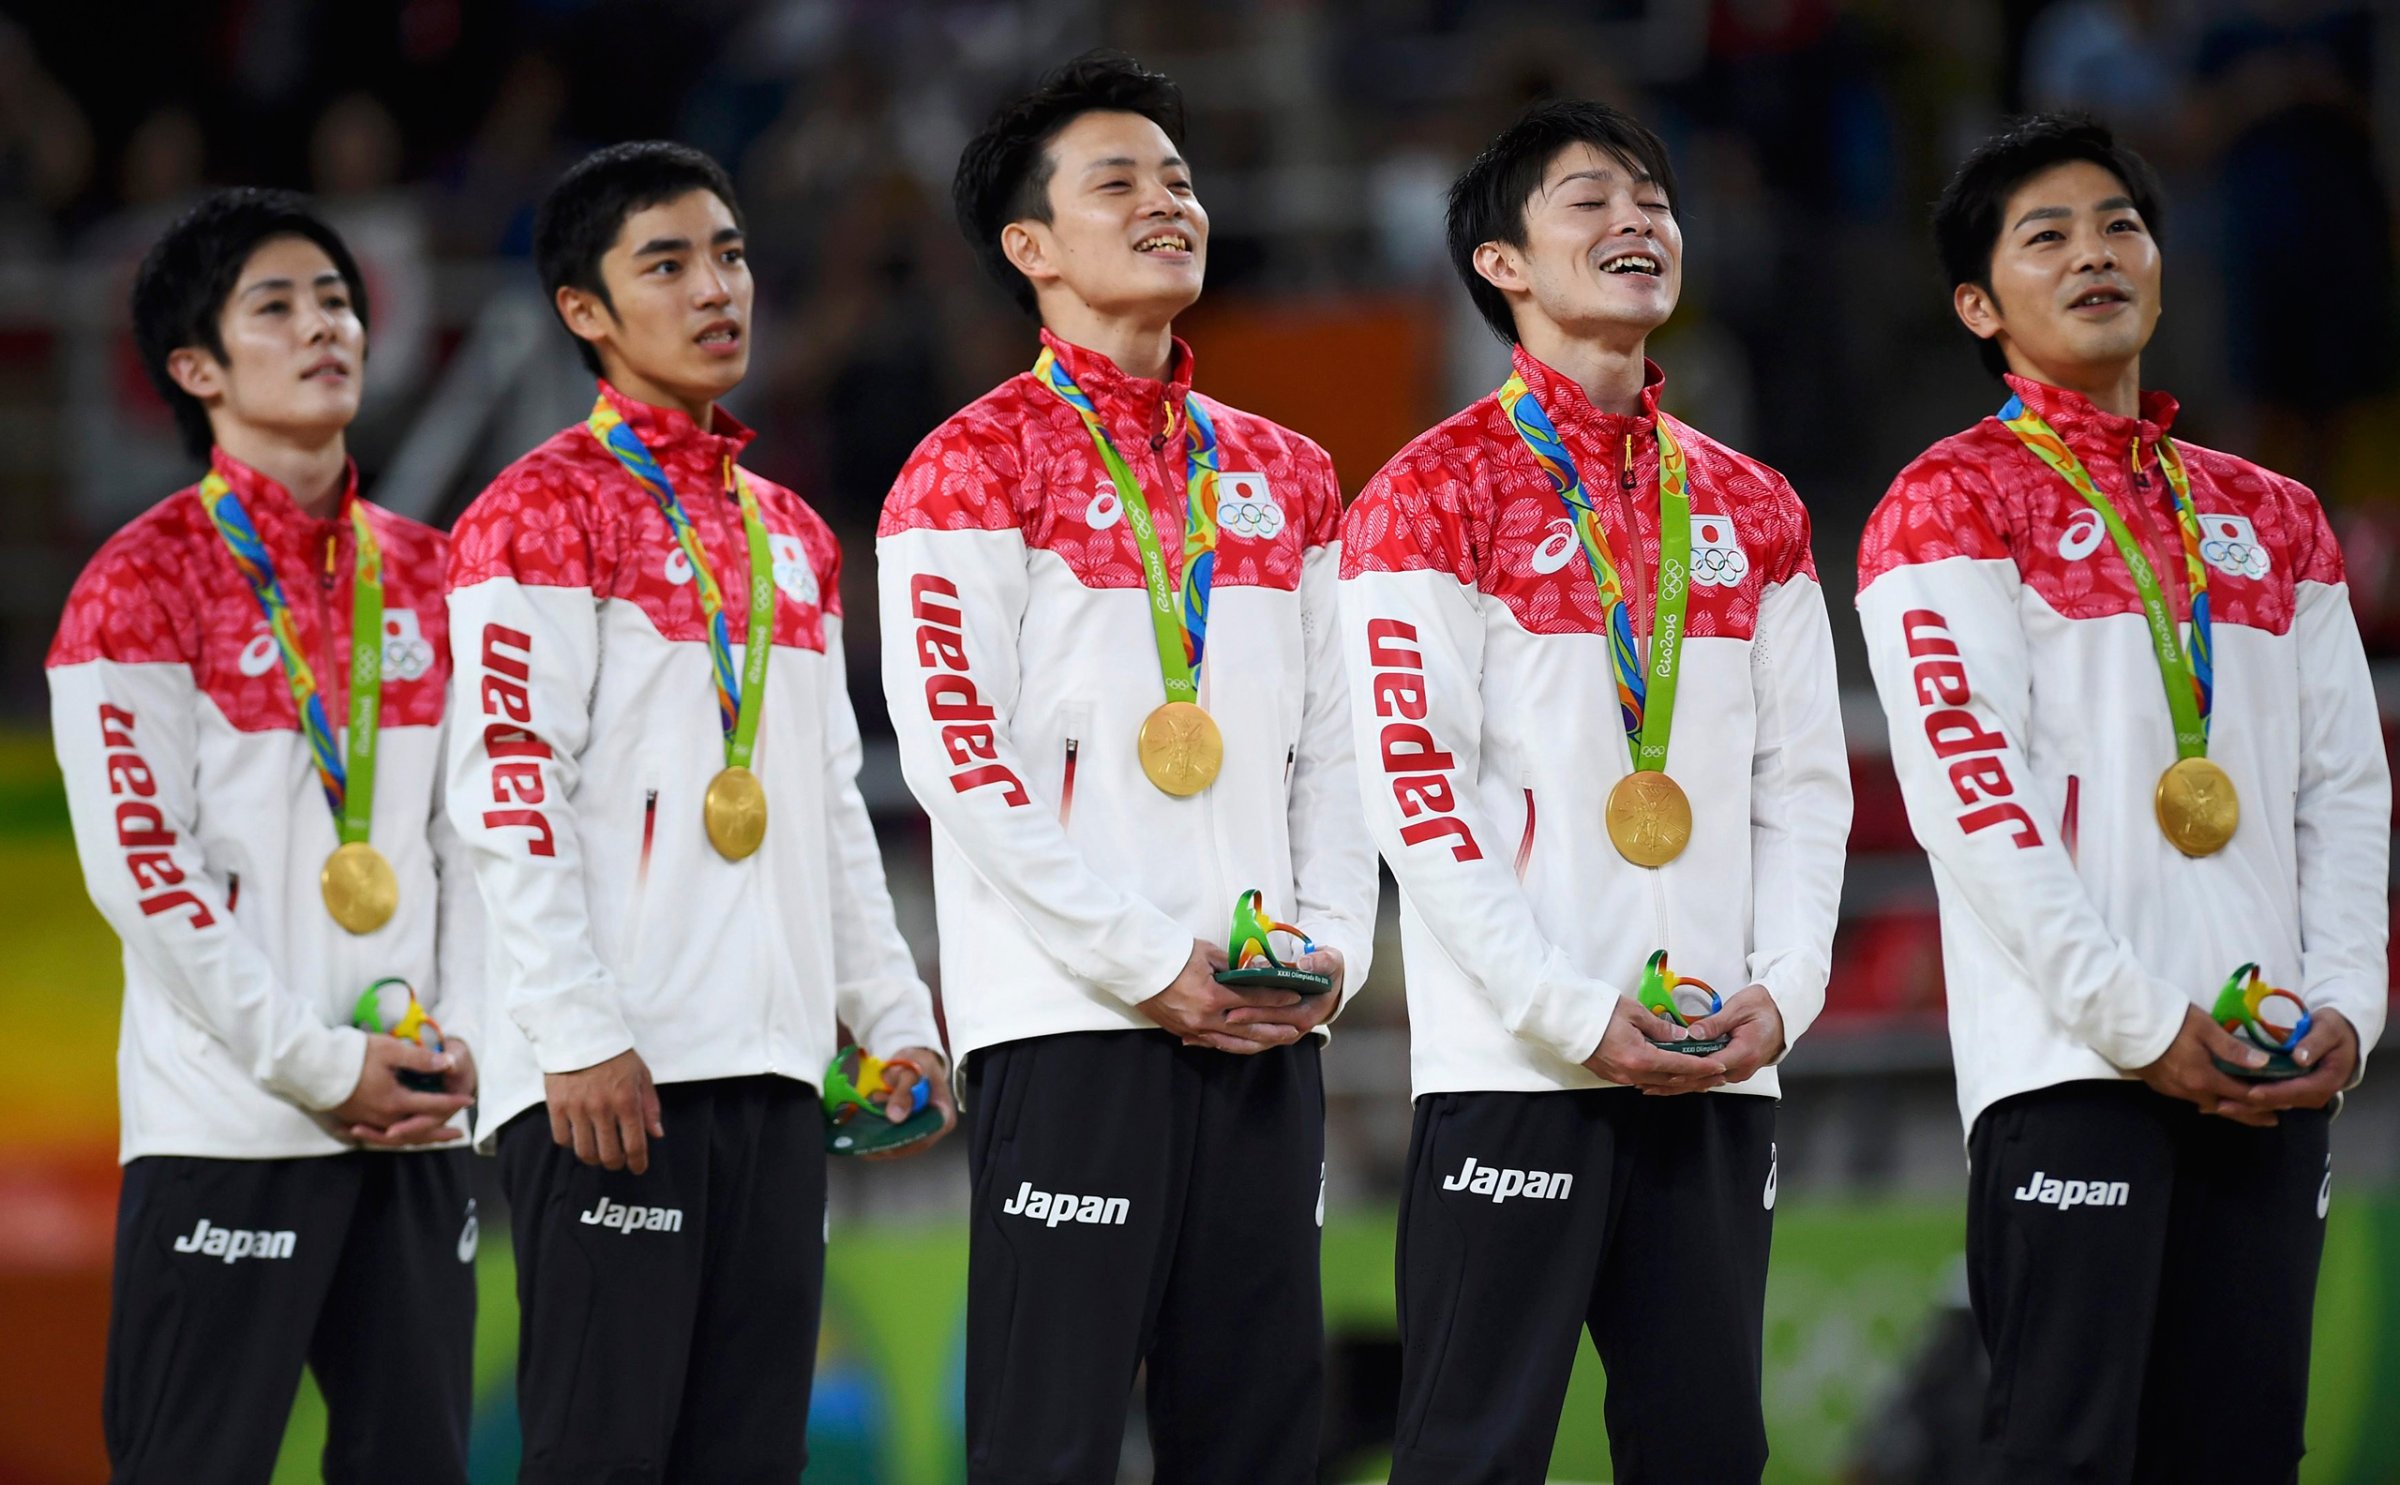 2016 Rio Olympics - Artistic Gymnastics - Final - Men's Team Final - Rio Olympic Arena - Rio de Janeiro, Brazil - 08/08/2016. (L-R) Ryohei Kato (JPN) of Japan, Kenzo Shirai (JPN) of Japan, Yusuke Tanaka (JPN) of Japan, Kohei Uchimura (JPN) of Japan, Koji Yamamuro (JPN) of Japan on the podium with their gold medals after winning the men's team final. REUTERS/Dylan Martinez TPX IMAGES OF THE DAY FOR EDITORIAL USE ONLY. NOT FOR SALE FOR MARKETING OR ADVERTISING CAMPAIGNS.